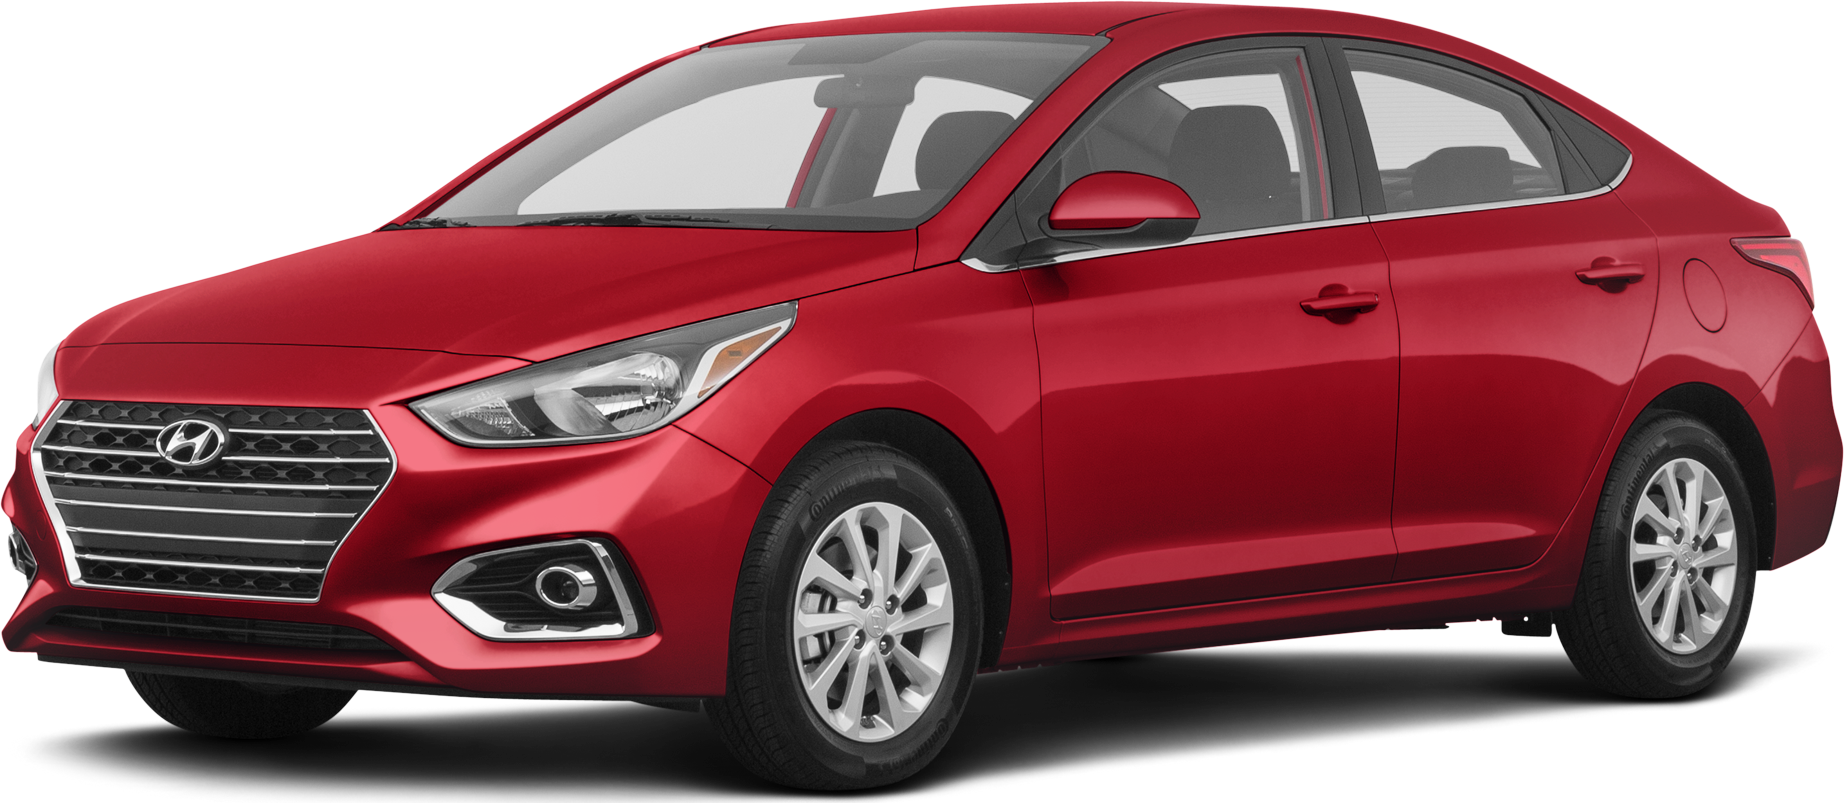 2015 Hyundai Accent vs. 2015 Hyundai Elantra: What's the Difference? -  Autotrader